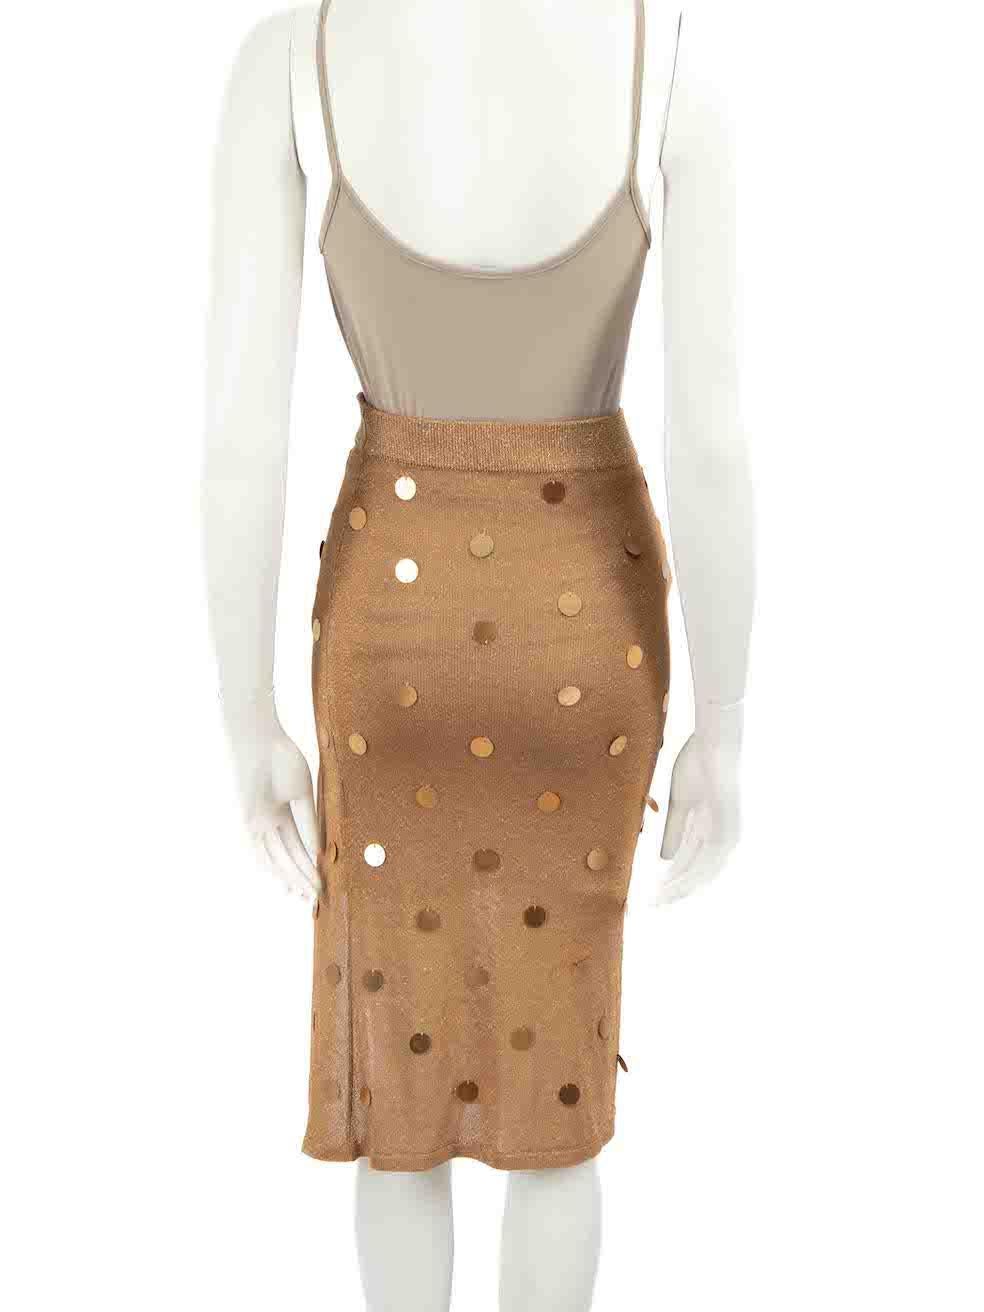 House of Harlow 1960 x Revolve Gold Knit Sequin Midi Skirt  In Good Condition For Sale In London, GB